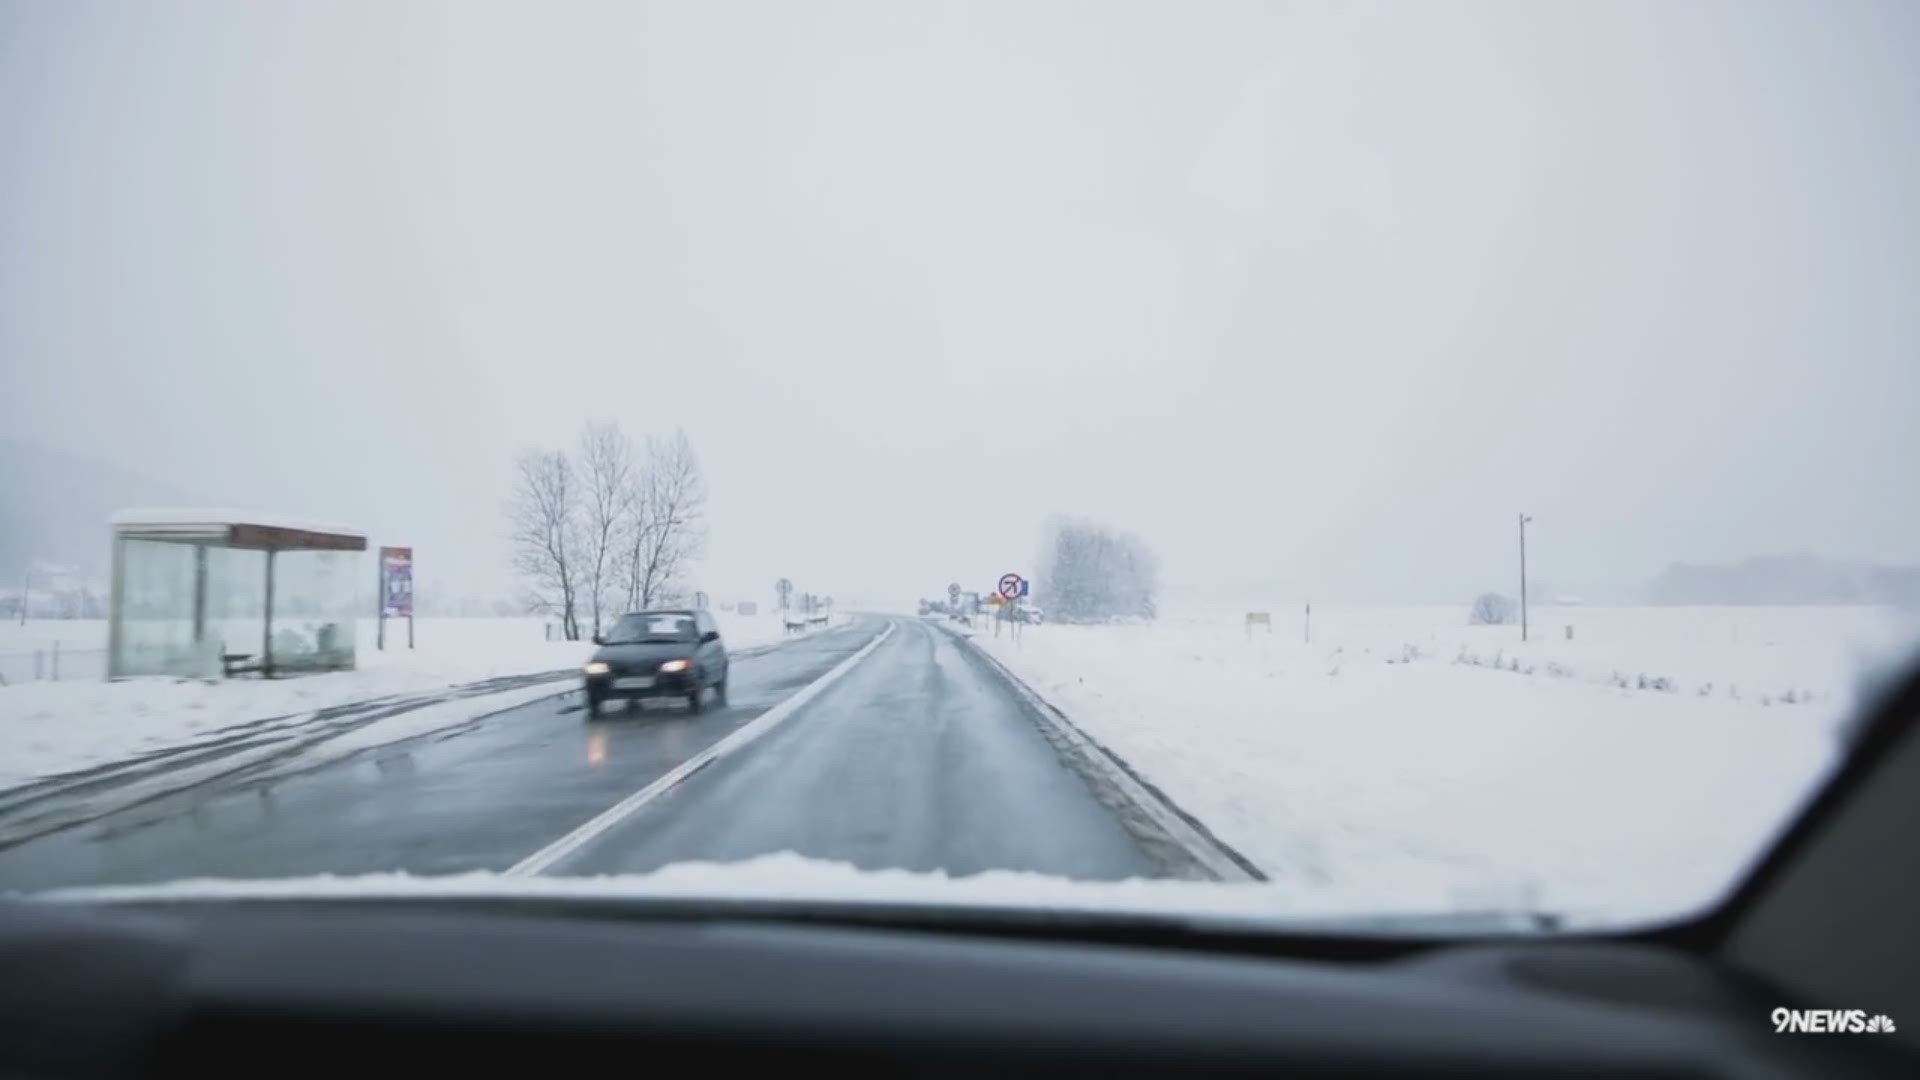 Some basic advice for staying safe on winter roads, from AAA.